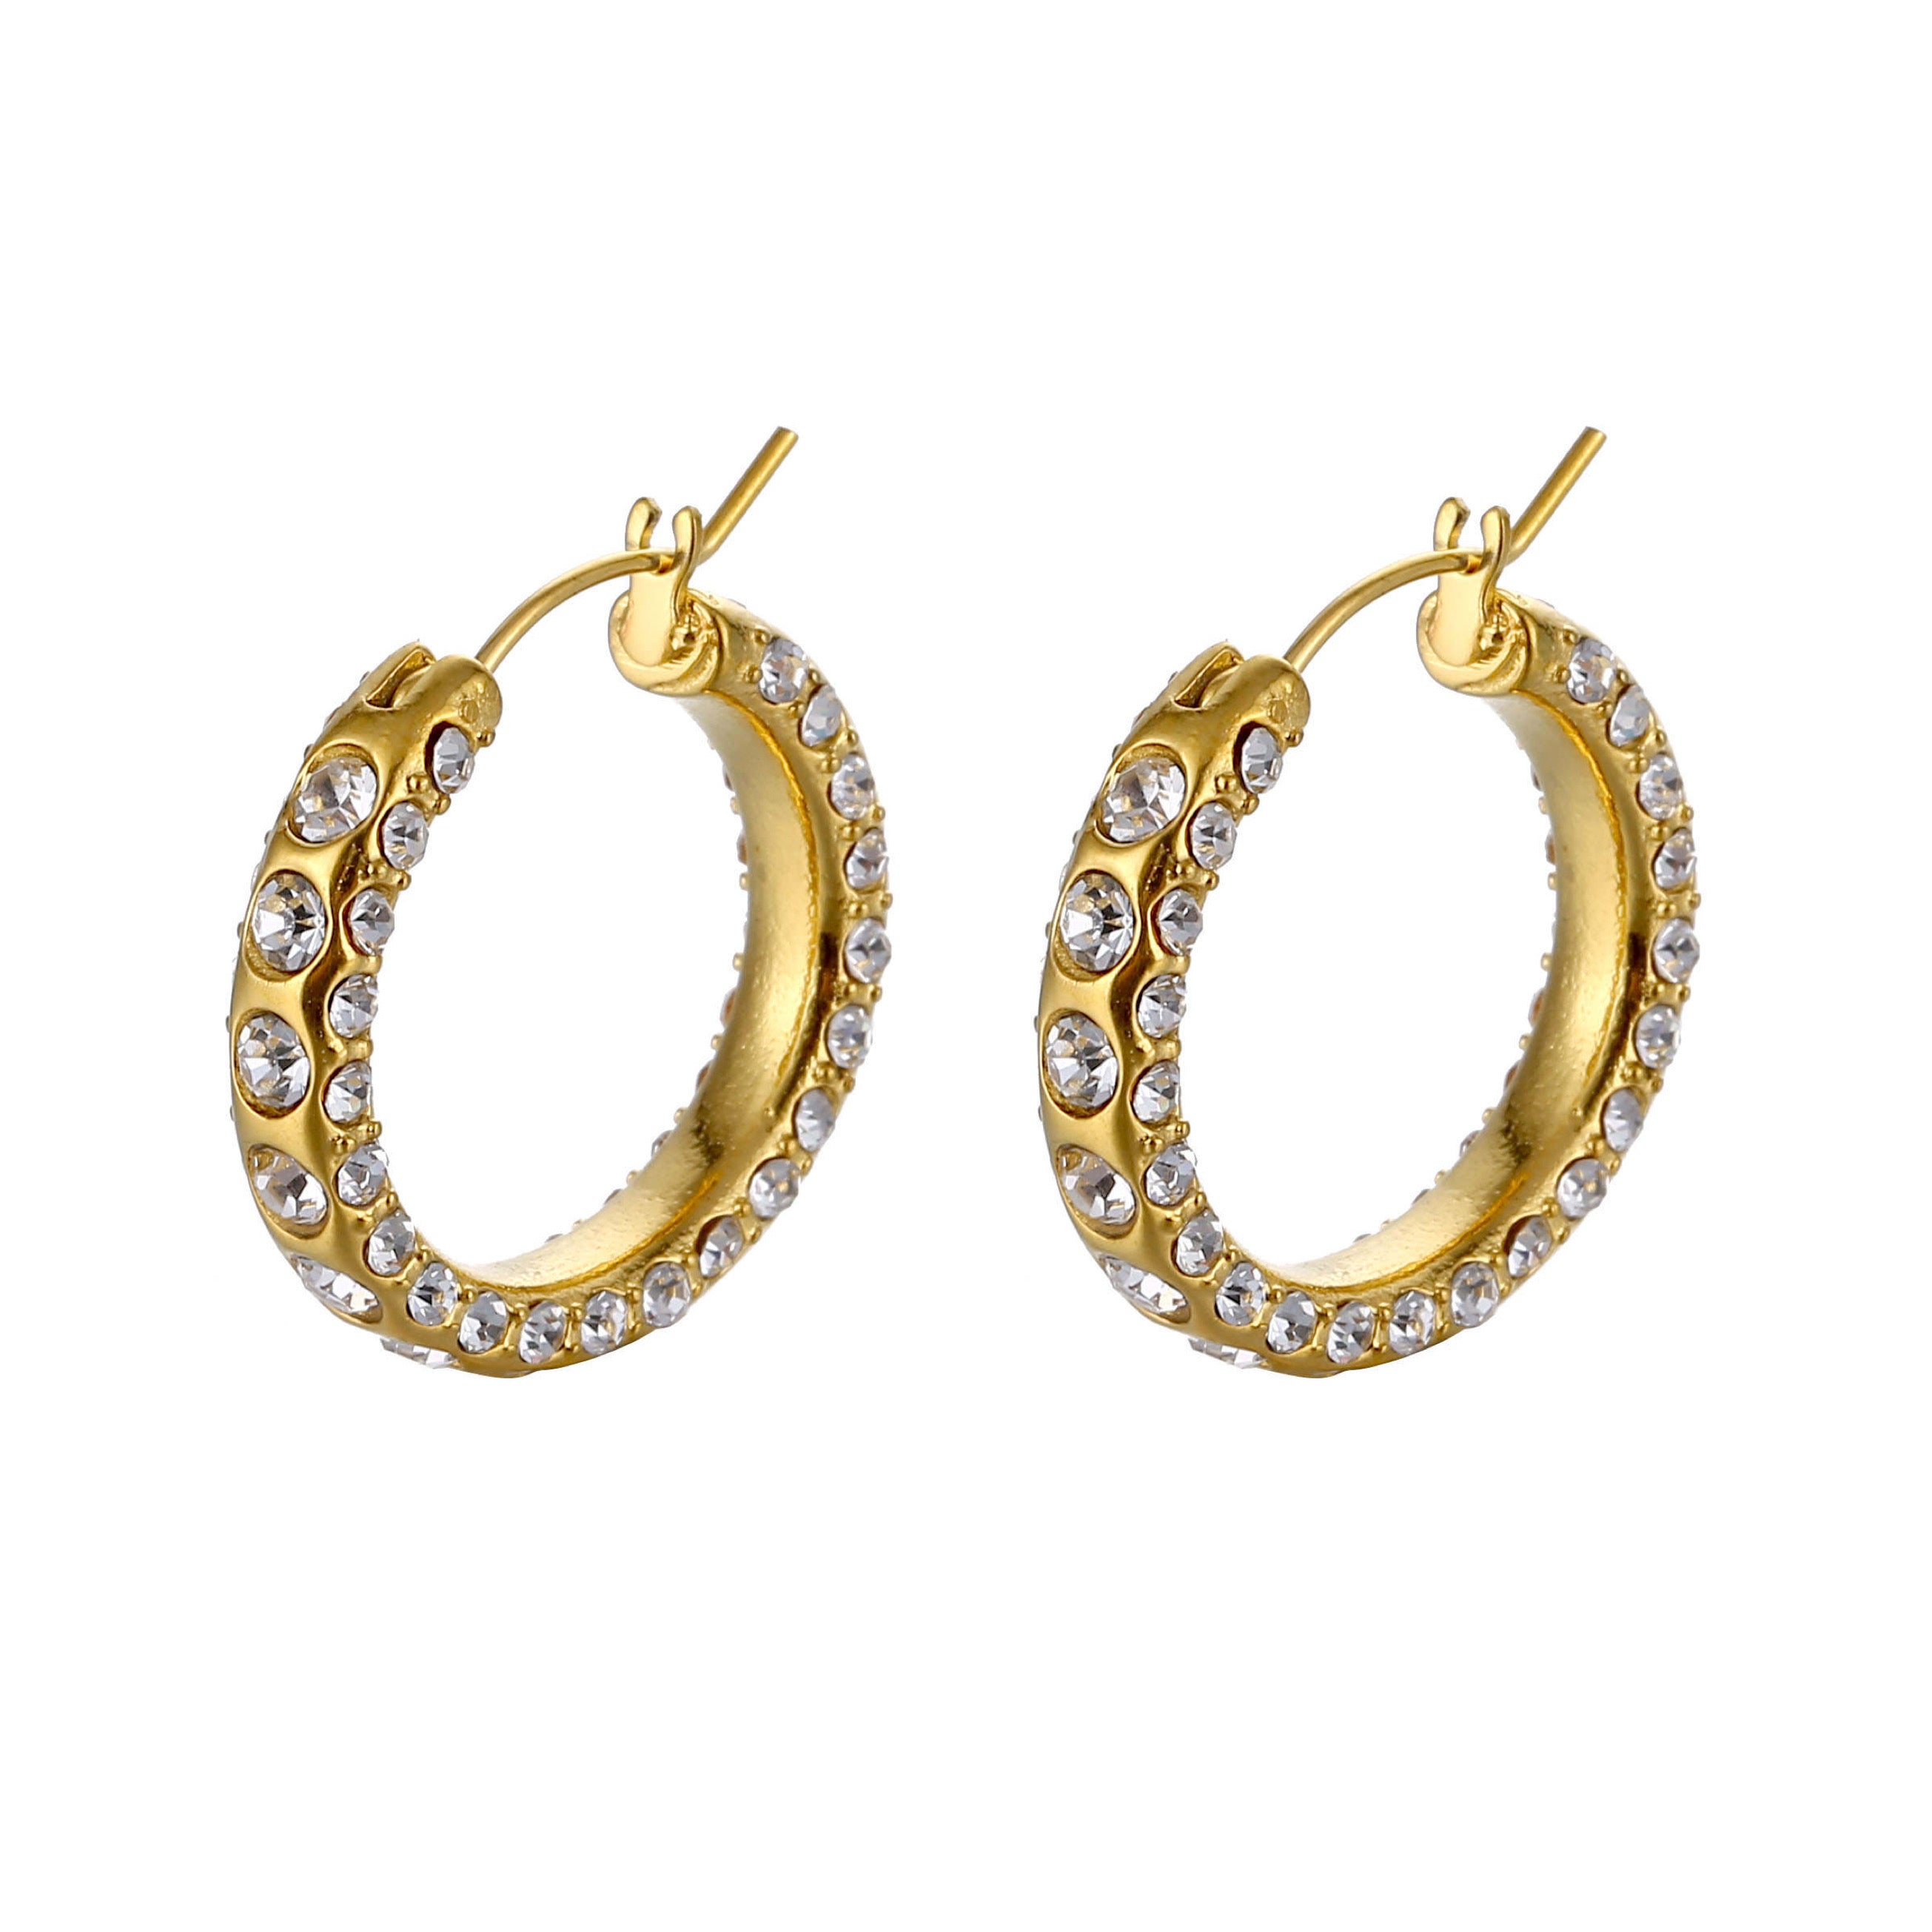 Hailey Hoops: Stylish Gold Earrings for Effortless Glam – pamu.store